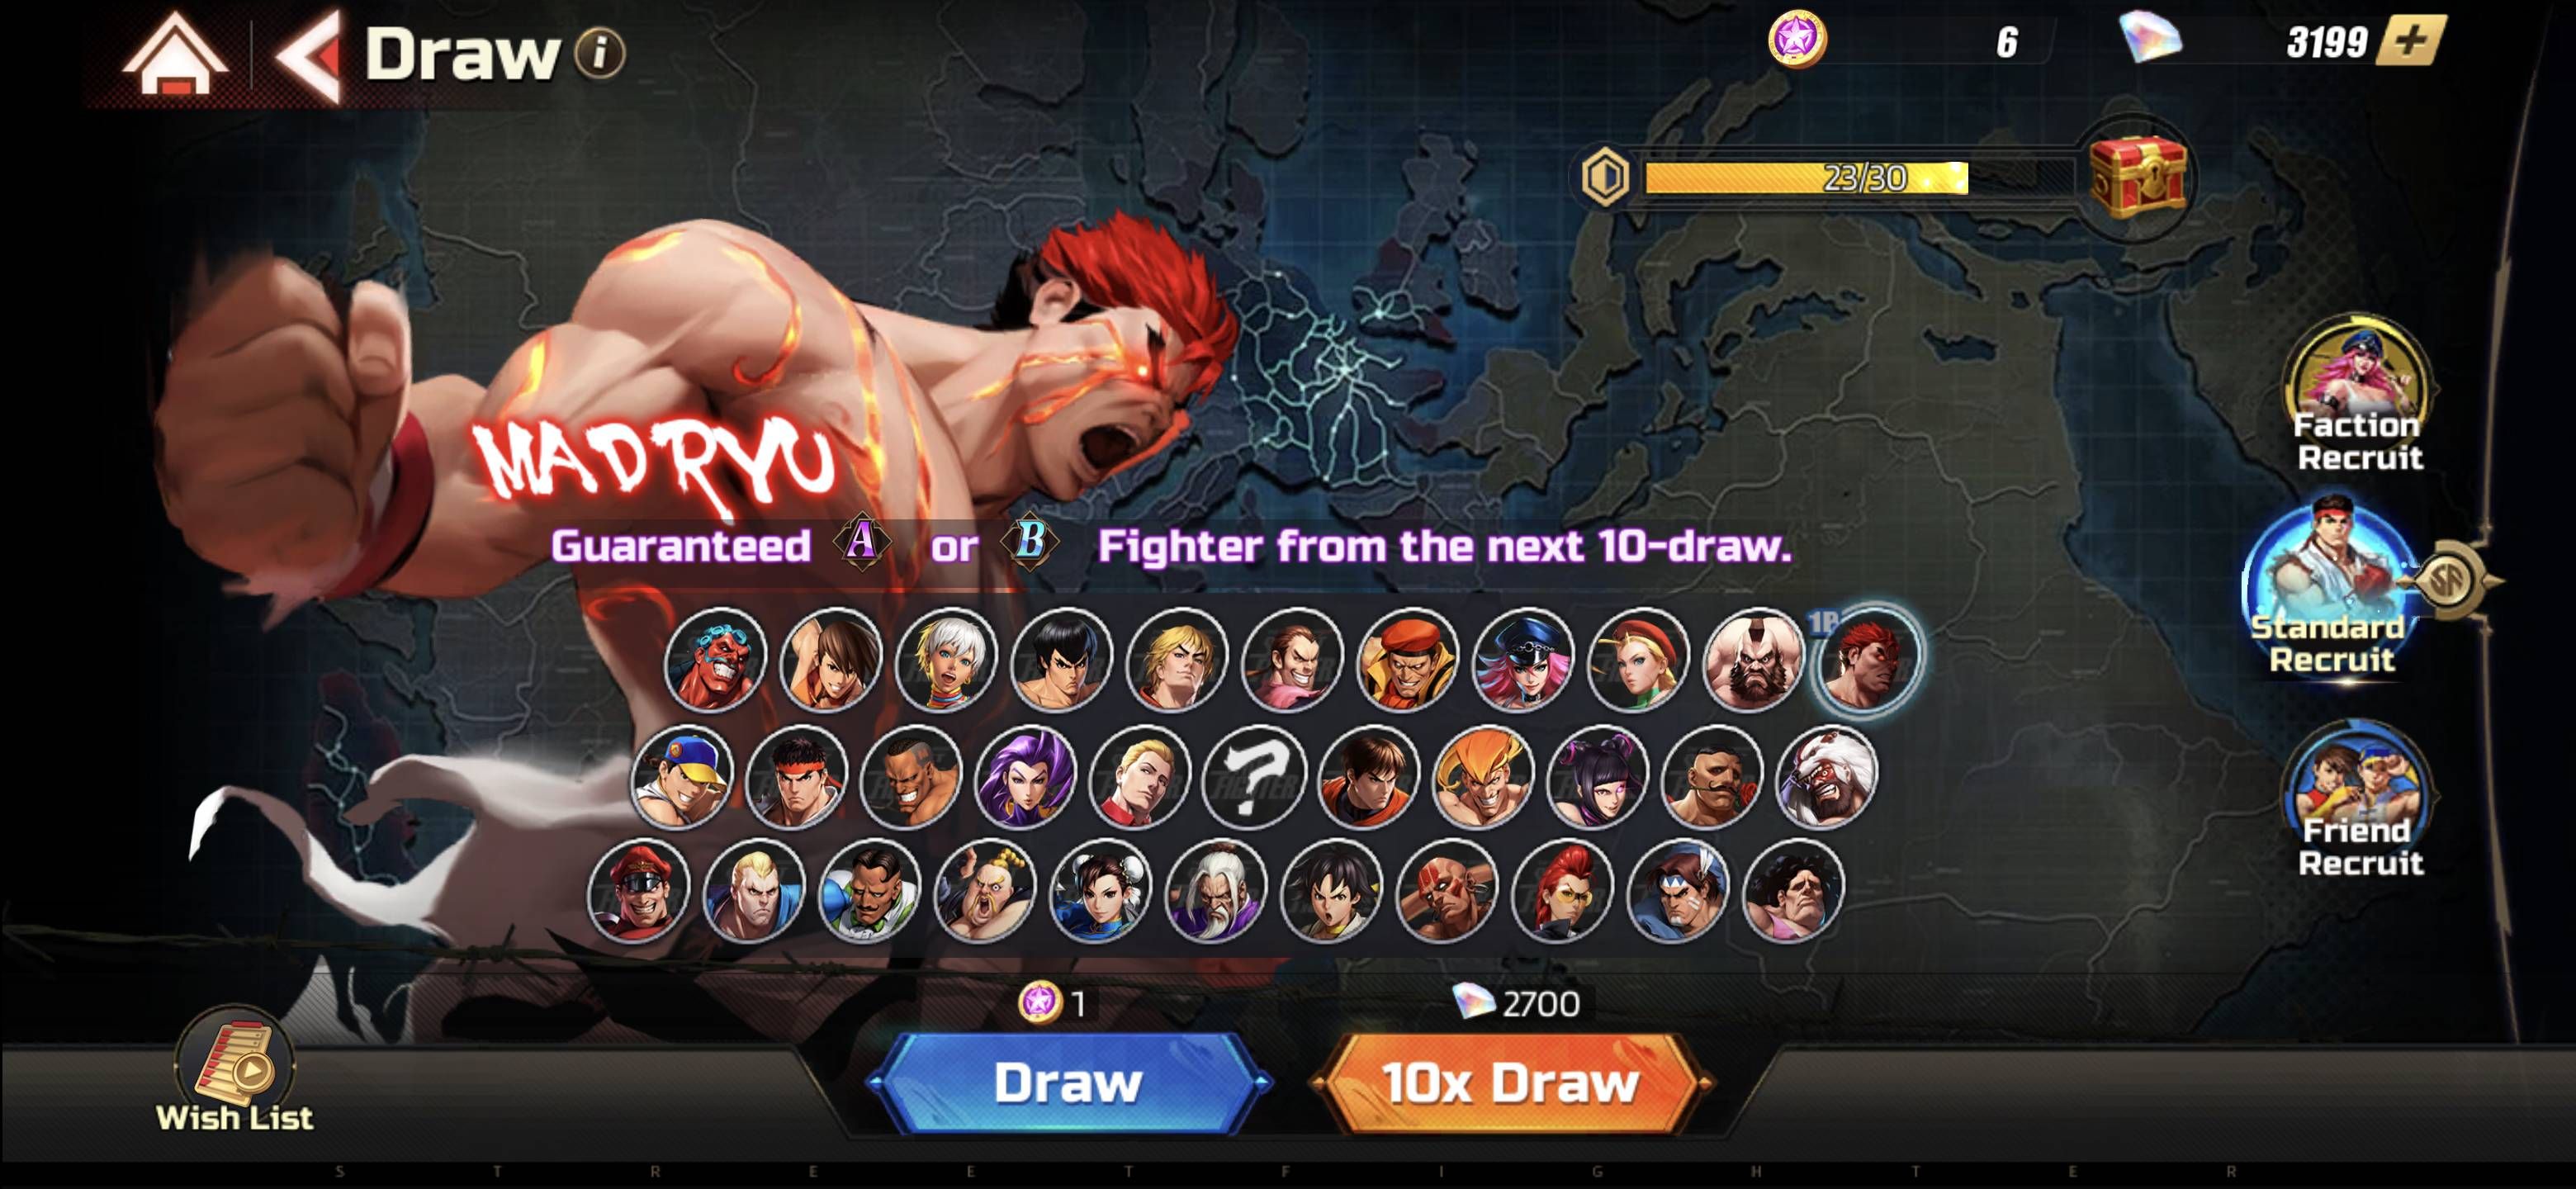 Street Fighter: Dull's fighter draw screen highlights Mad Ryu